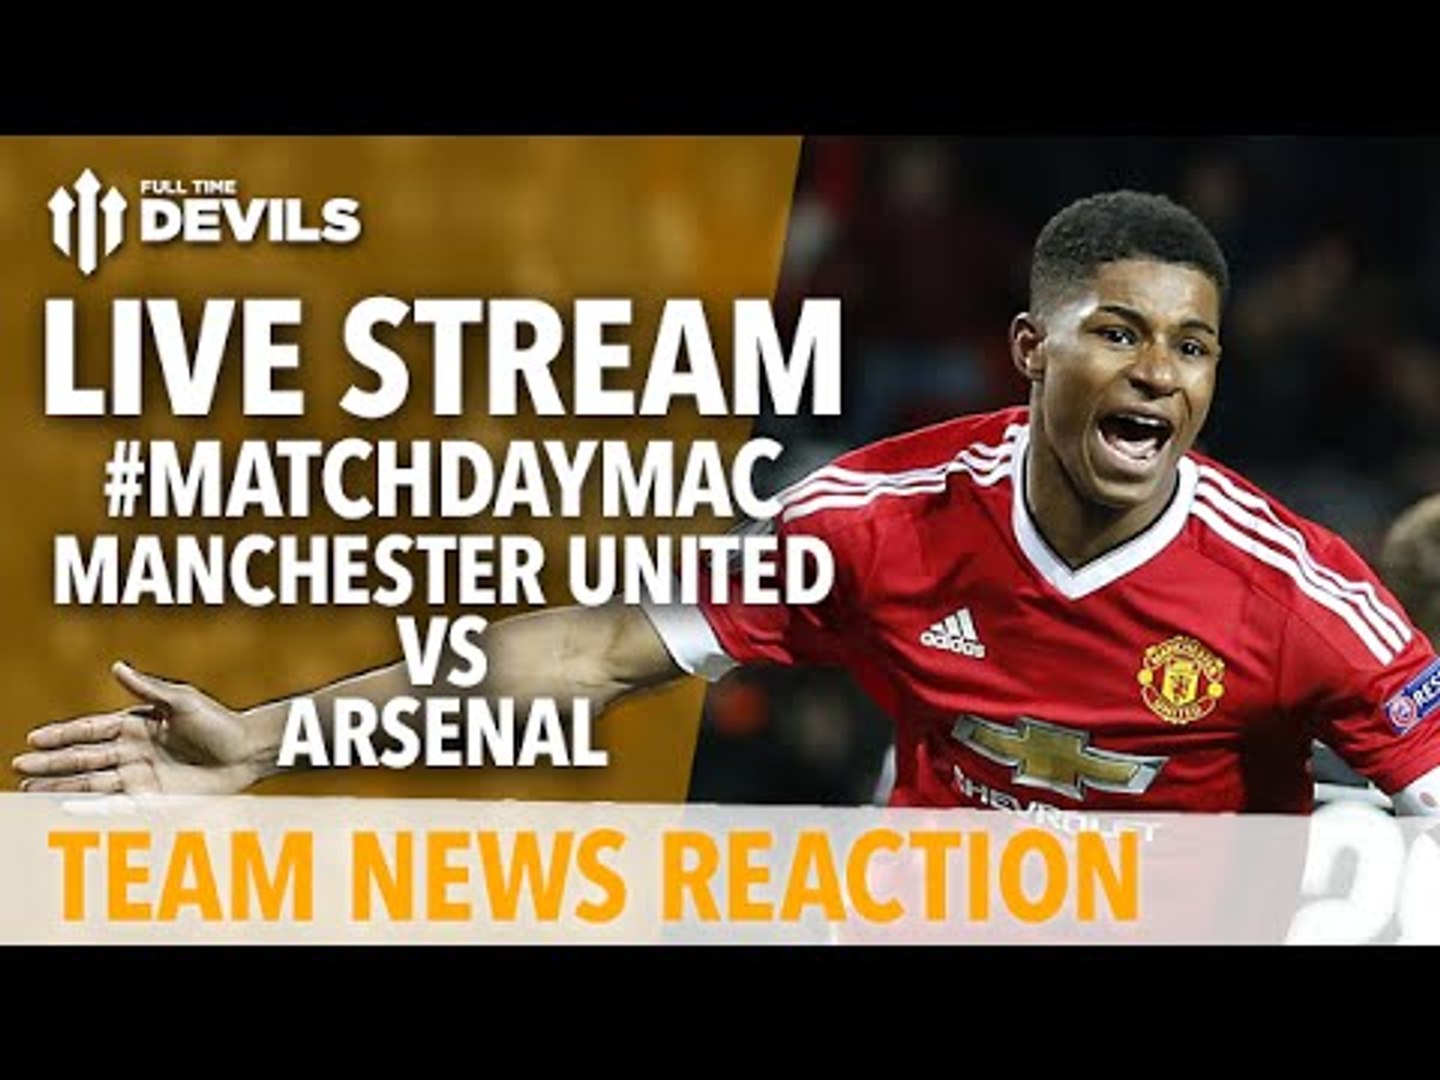 Marcus Rashford Again! Manchester United vs Arsenal LIVE STREAM! with Andy Tate